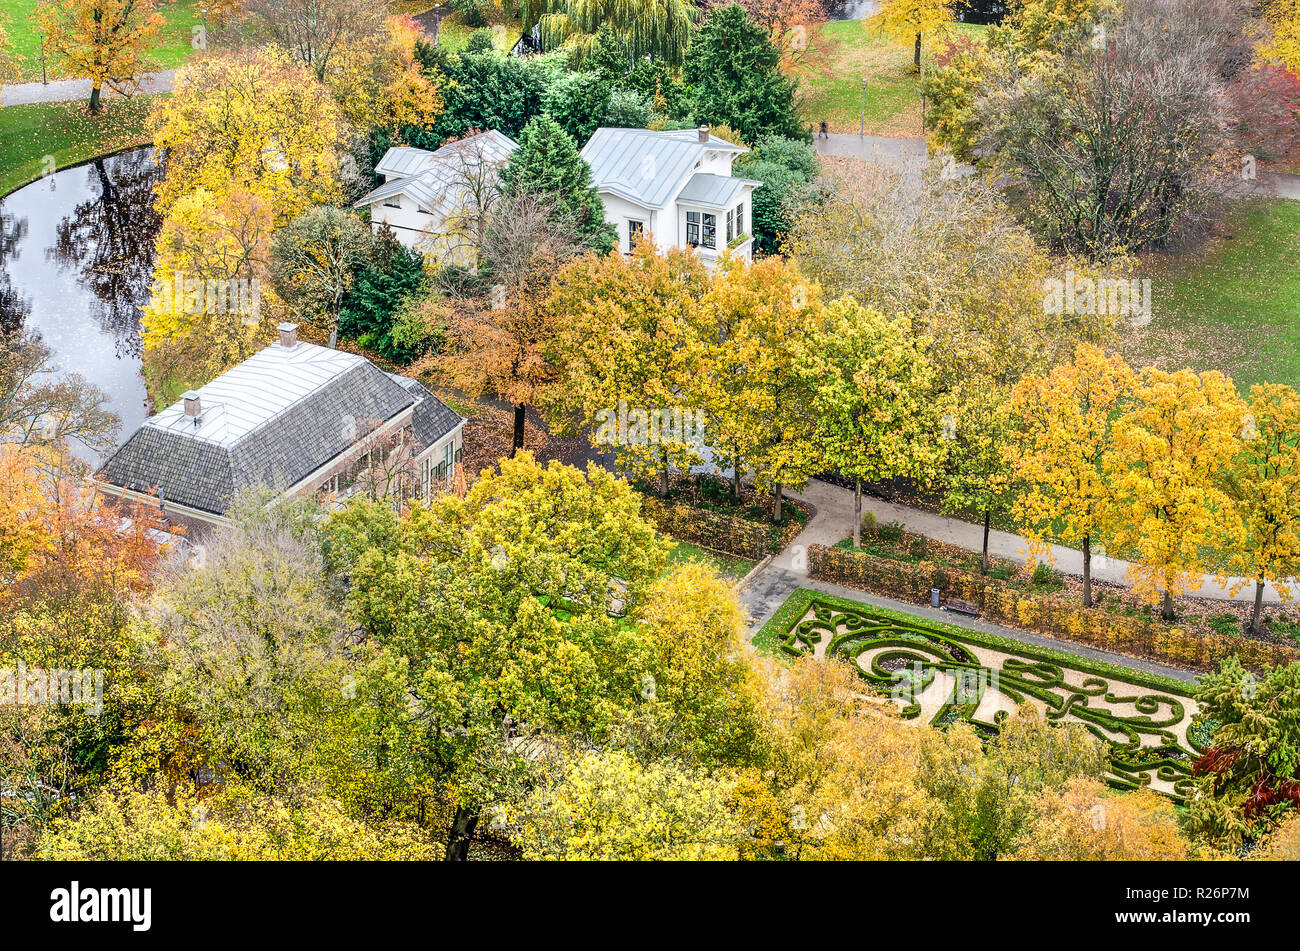 Rotterdam, The Netherlands, November 12, 2018: aerial view of The Park in autumn, with the former mansion and coach house, now both in use as a cafe,  Stock Photo